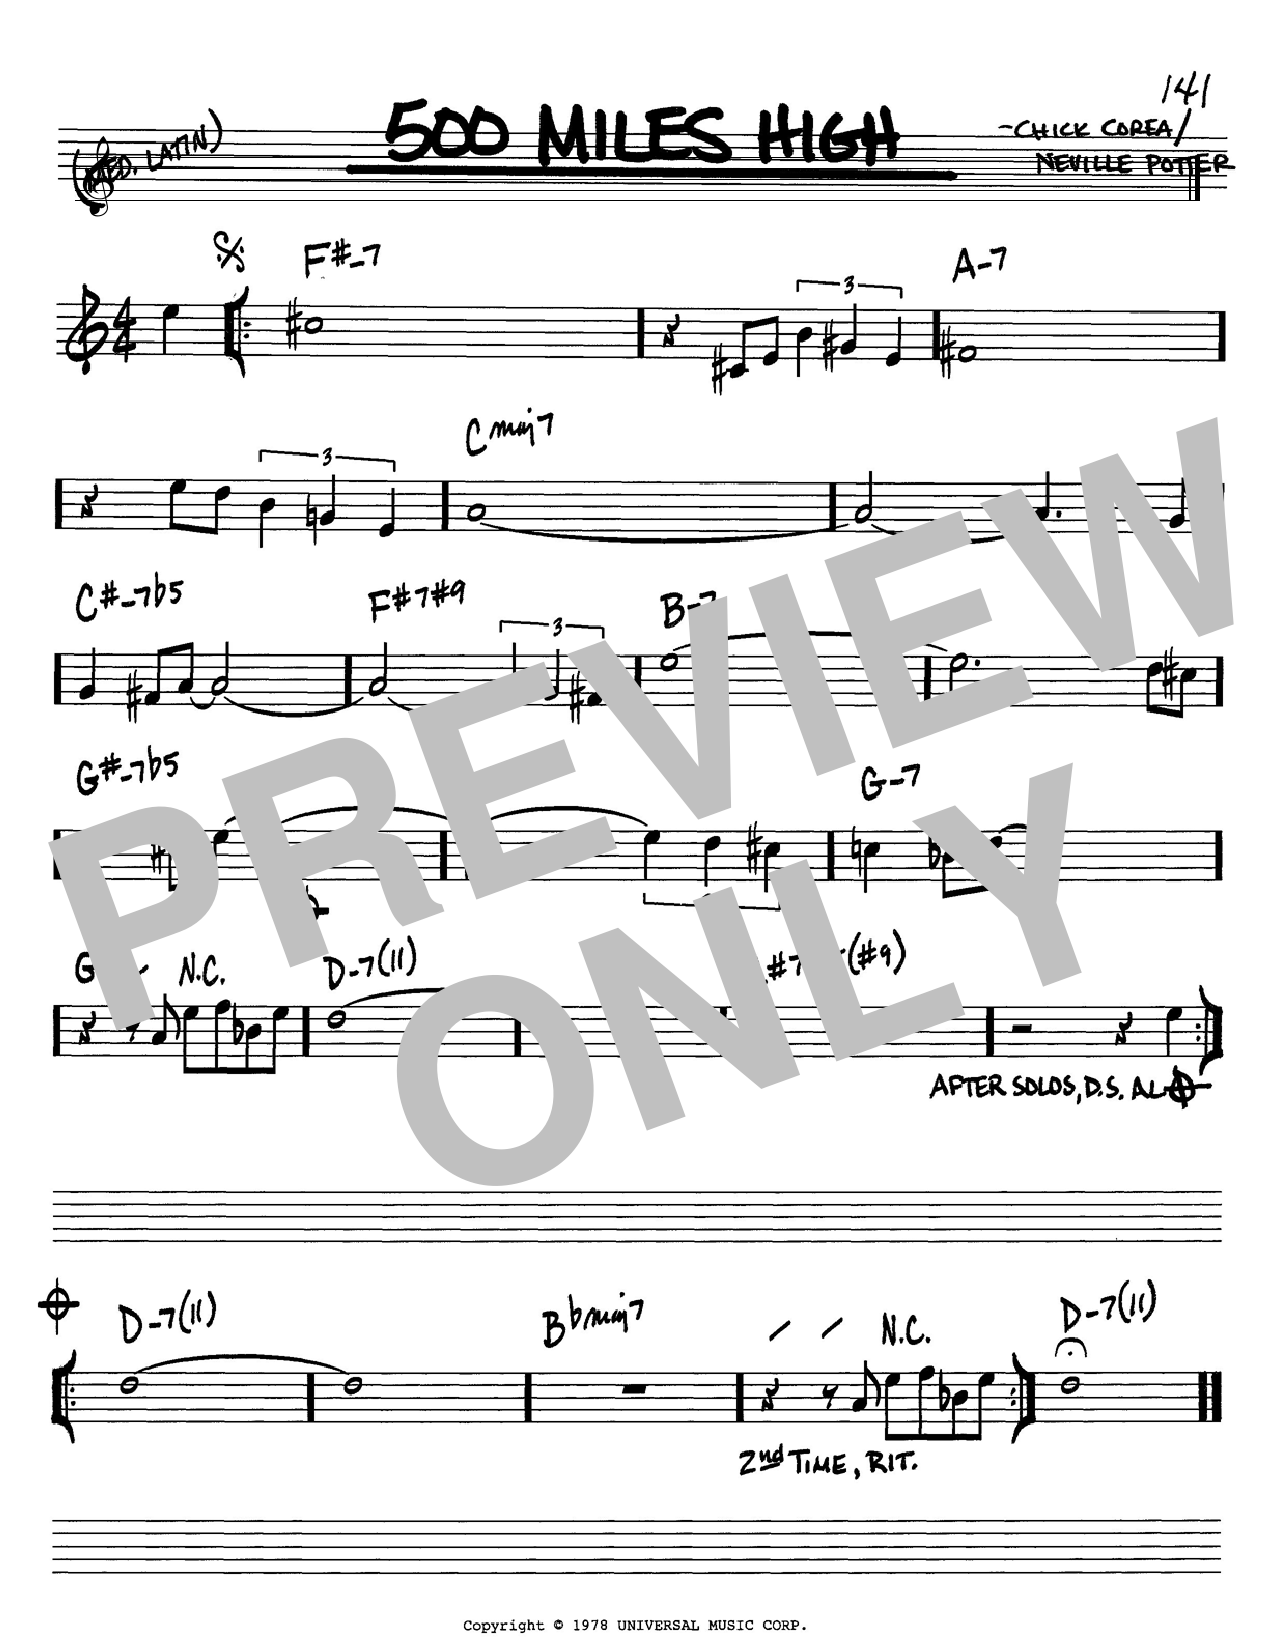 Chick Corea 500 Miles High Sheet Music Pdf Notes Chords Jazz Score Real Book Melody Chords Download Printable Sku 61476 Hi guys, have fun and enjoy! chick corea 500 miles high sheet music notes chords download printable real book melody chords pdf score sku 61476